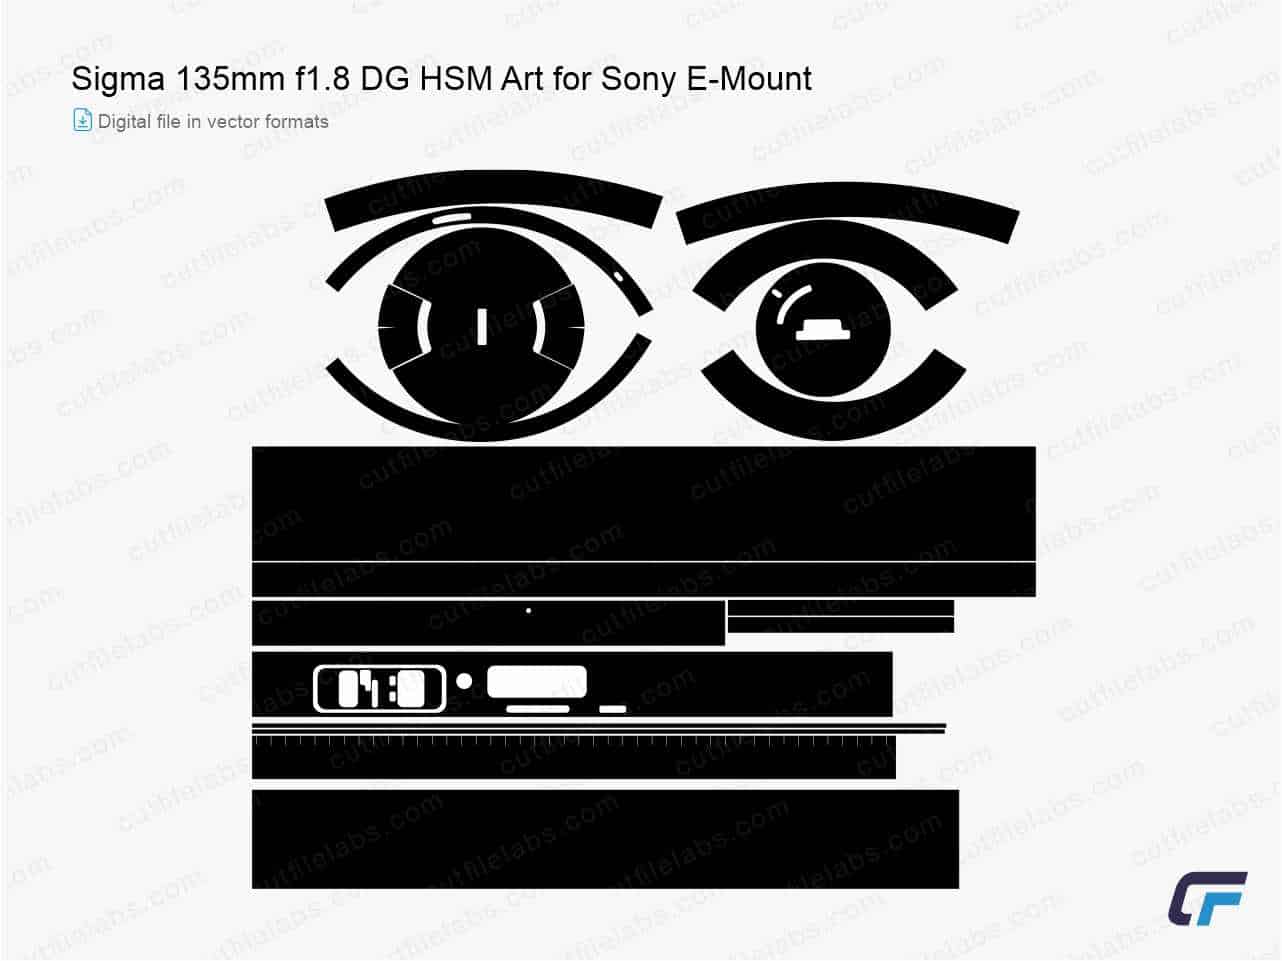 Sigma 135mm f1.8 DG HSM Art for Sony E-Mount (2019) Cut File Template